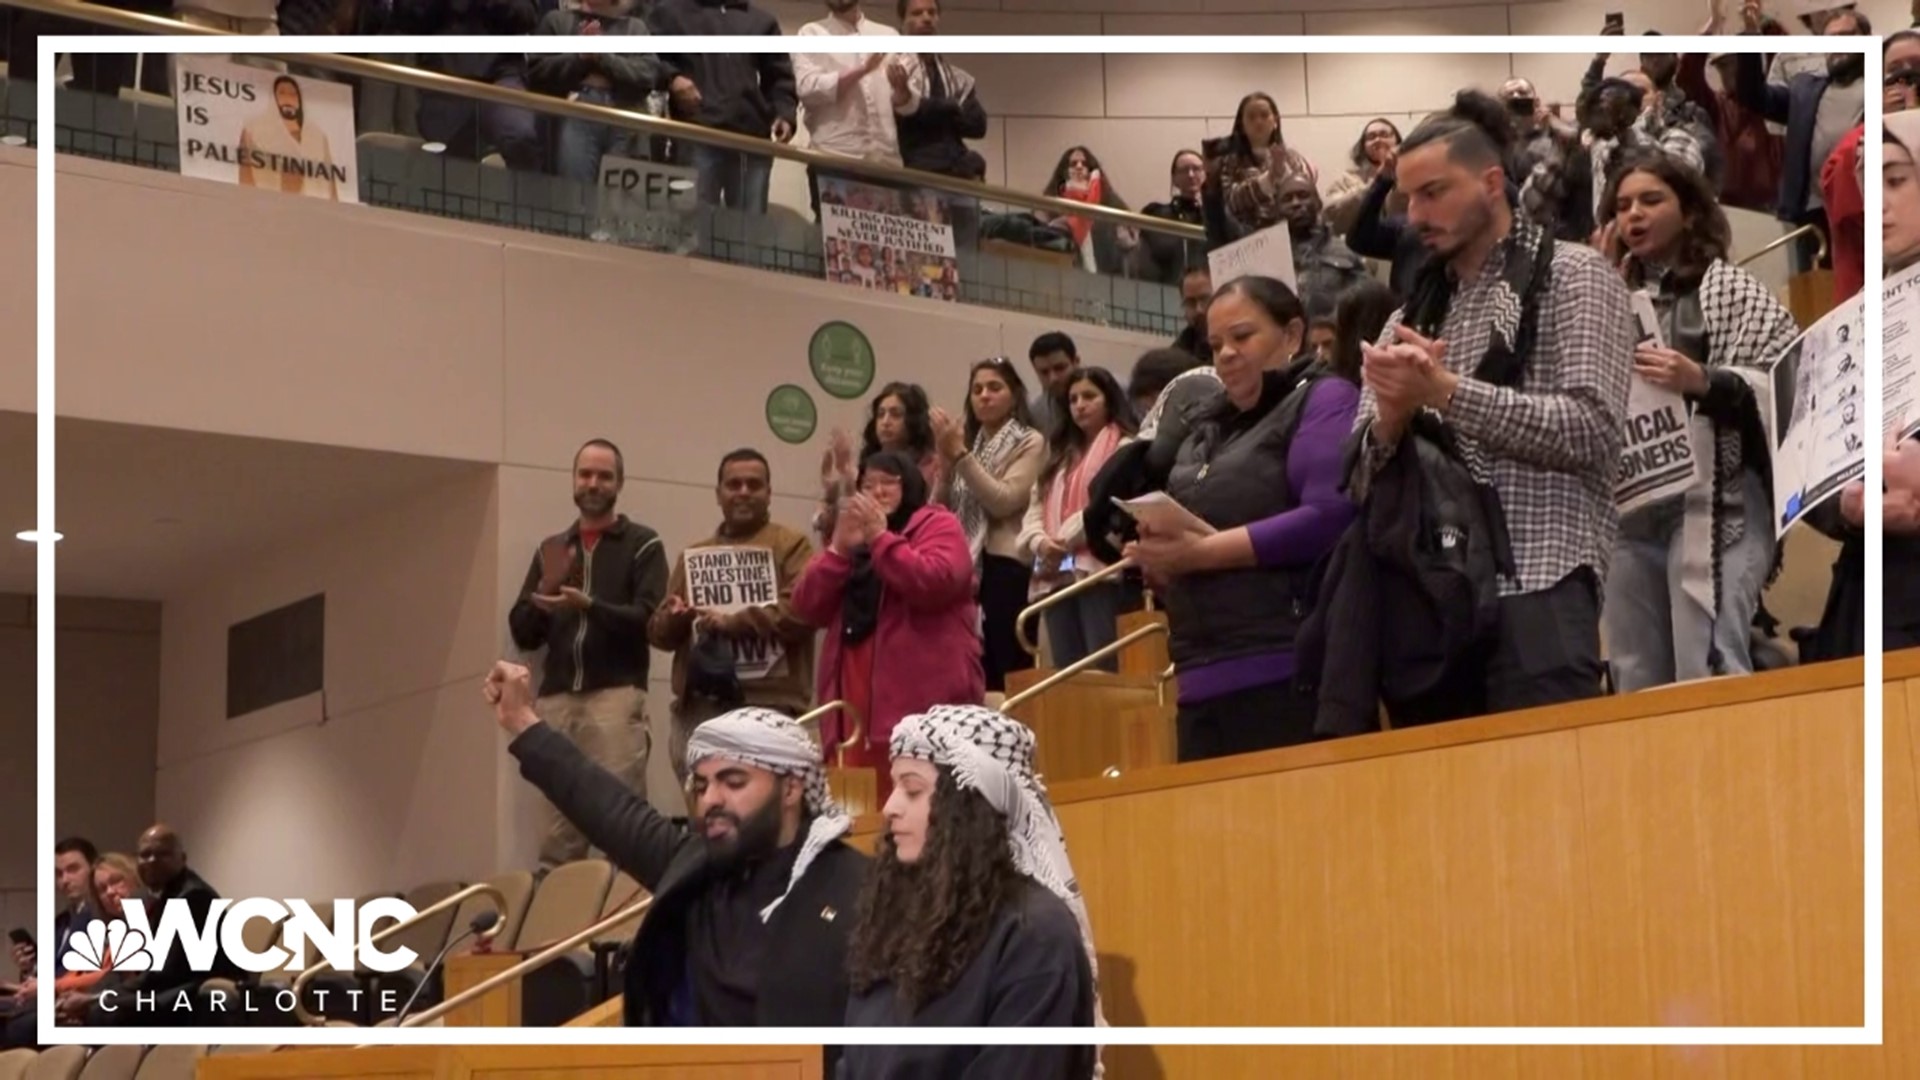 Palestinian supporters in Charlotte expressed their concerns to city council during Monday night's meeting.